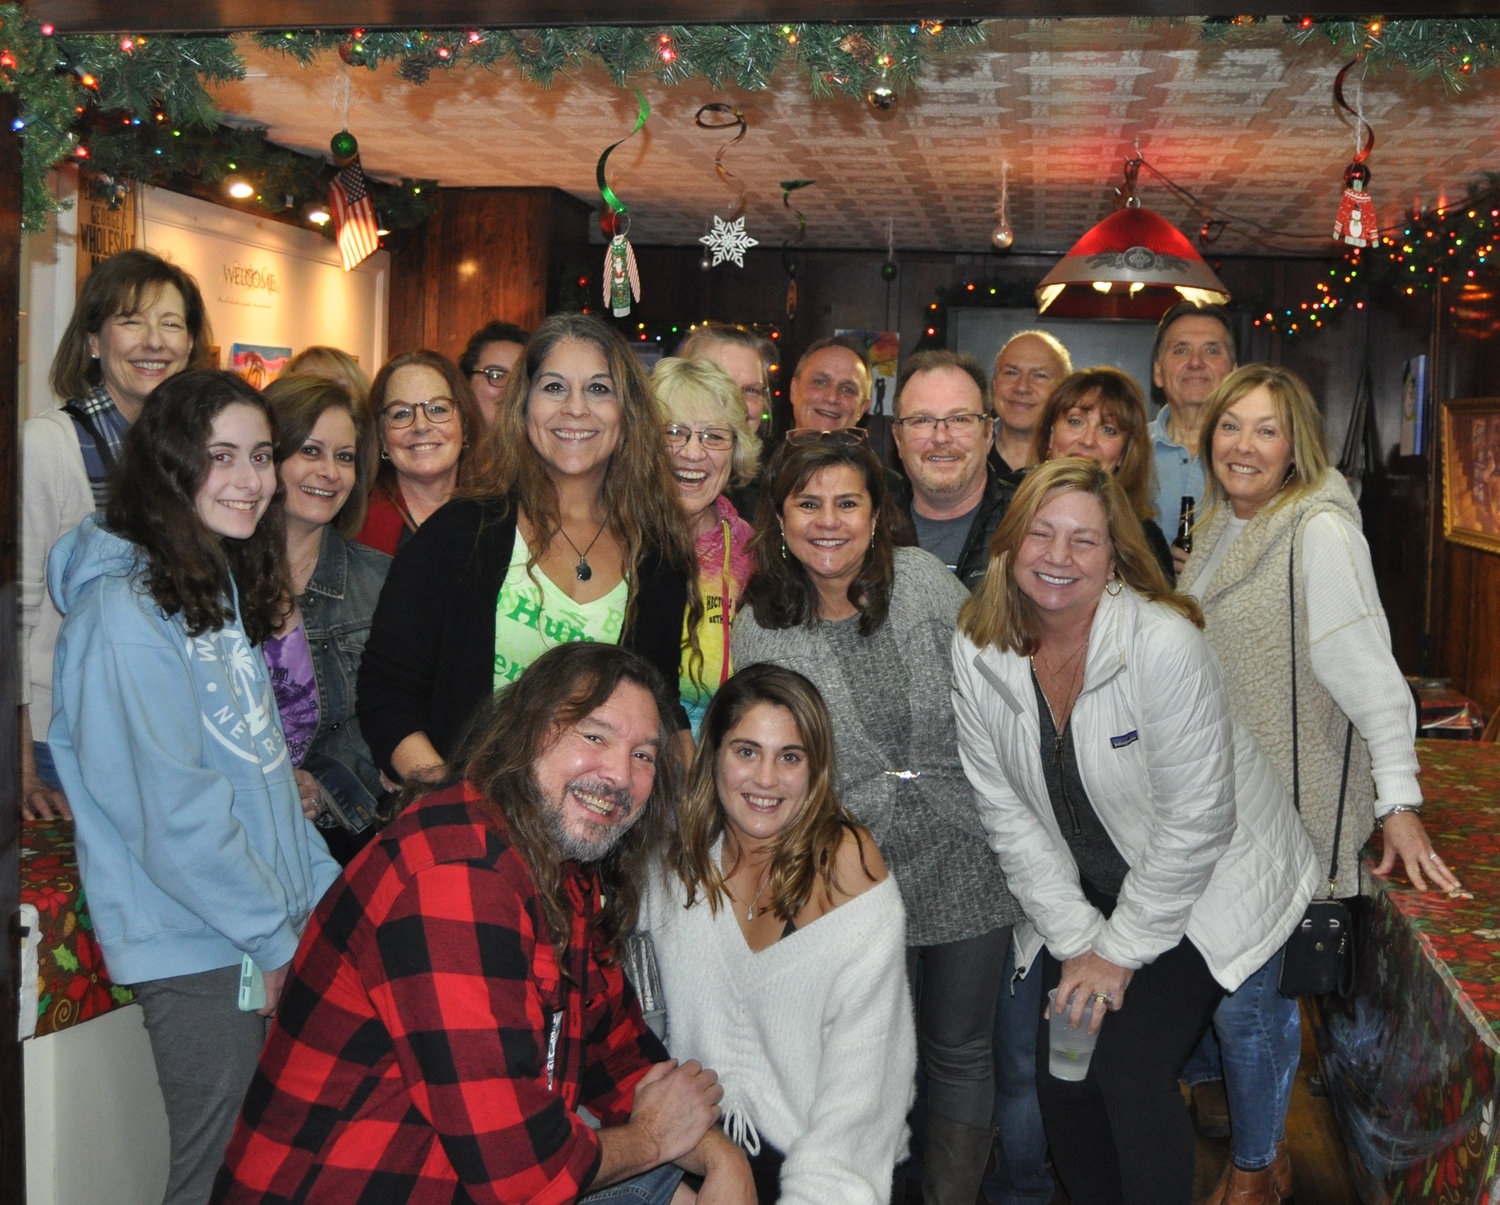 Kim Simons, standing center, in the green shirt, is surrounded by friends and family at Hector’s Inn in Bethel, NY to celebrate Simons’ team Bah Hum Bakers and their $25,000 first prize win on the Food Network’s “Holiday Wars.”